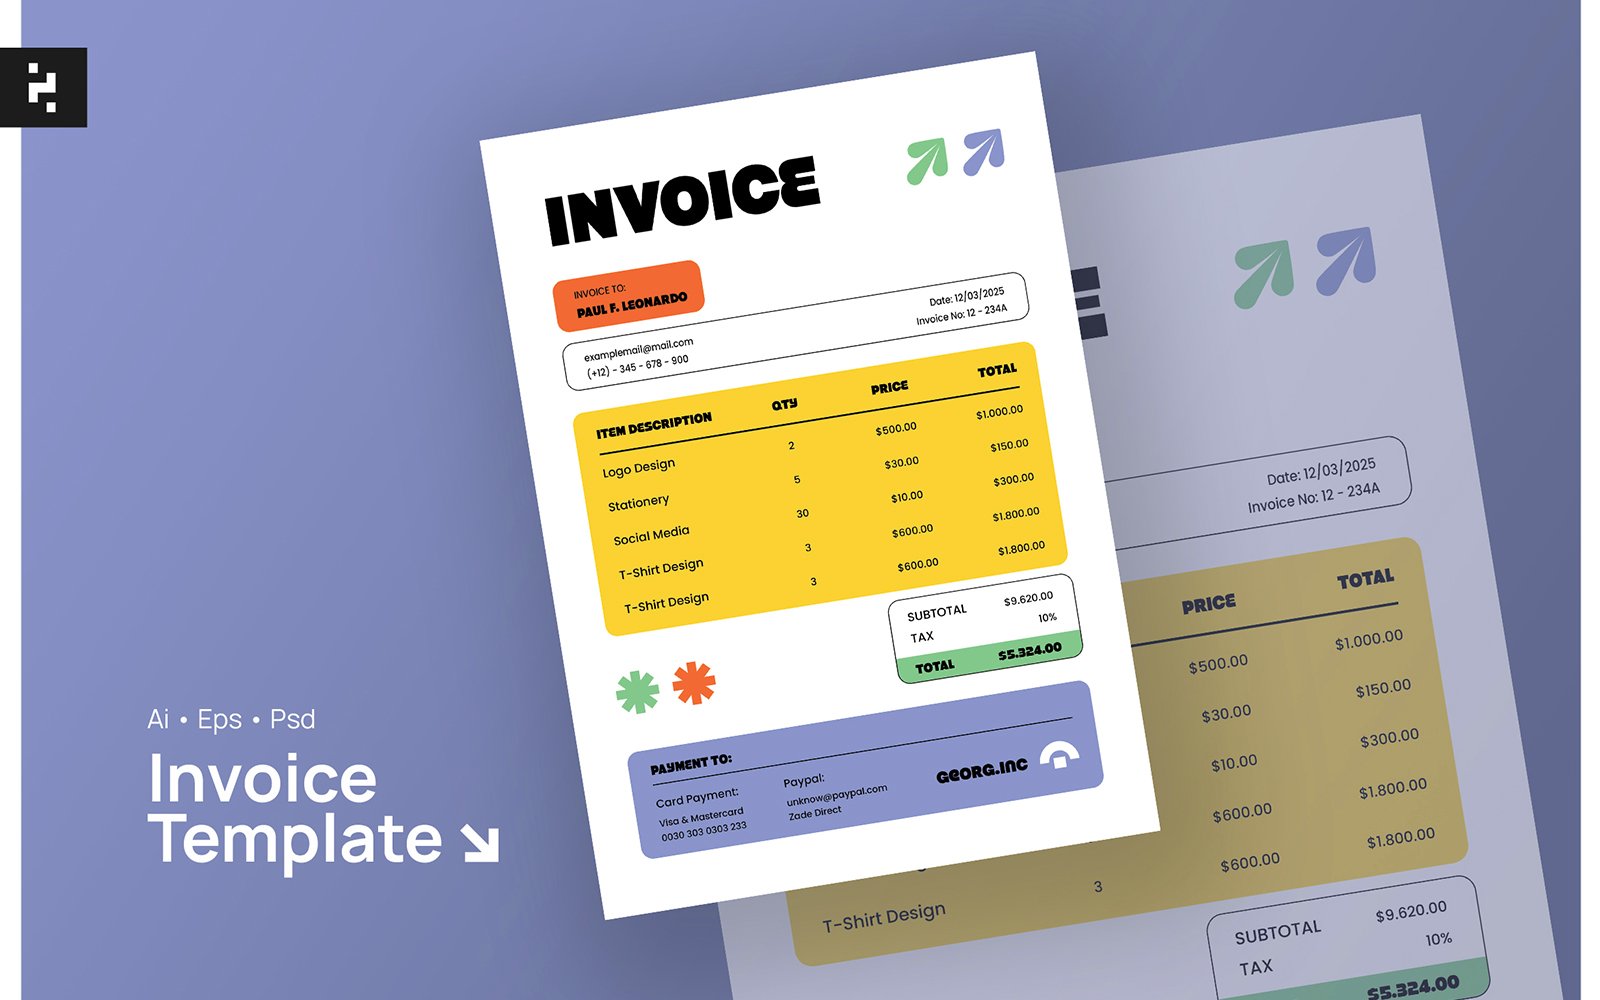 Kit Graphique #365836 Invoice Accounting Divers Modles Web - Logo template Preview